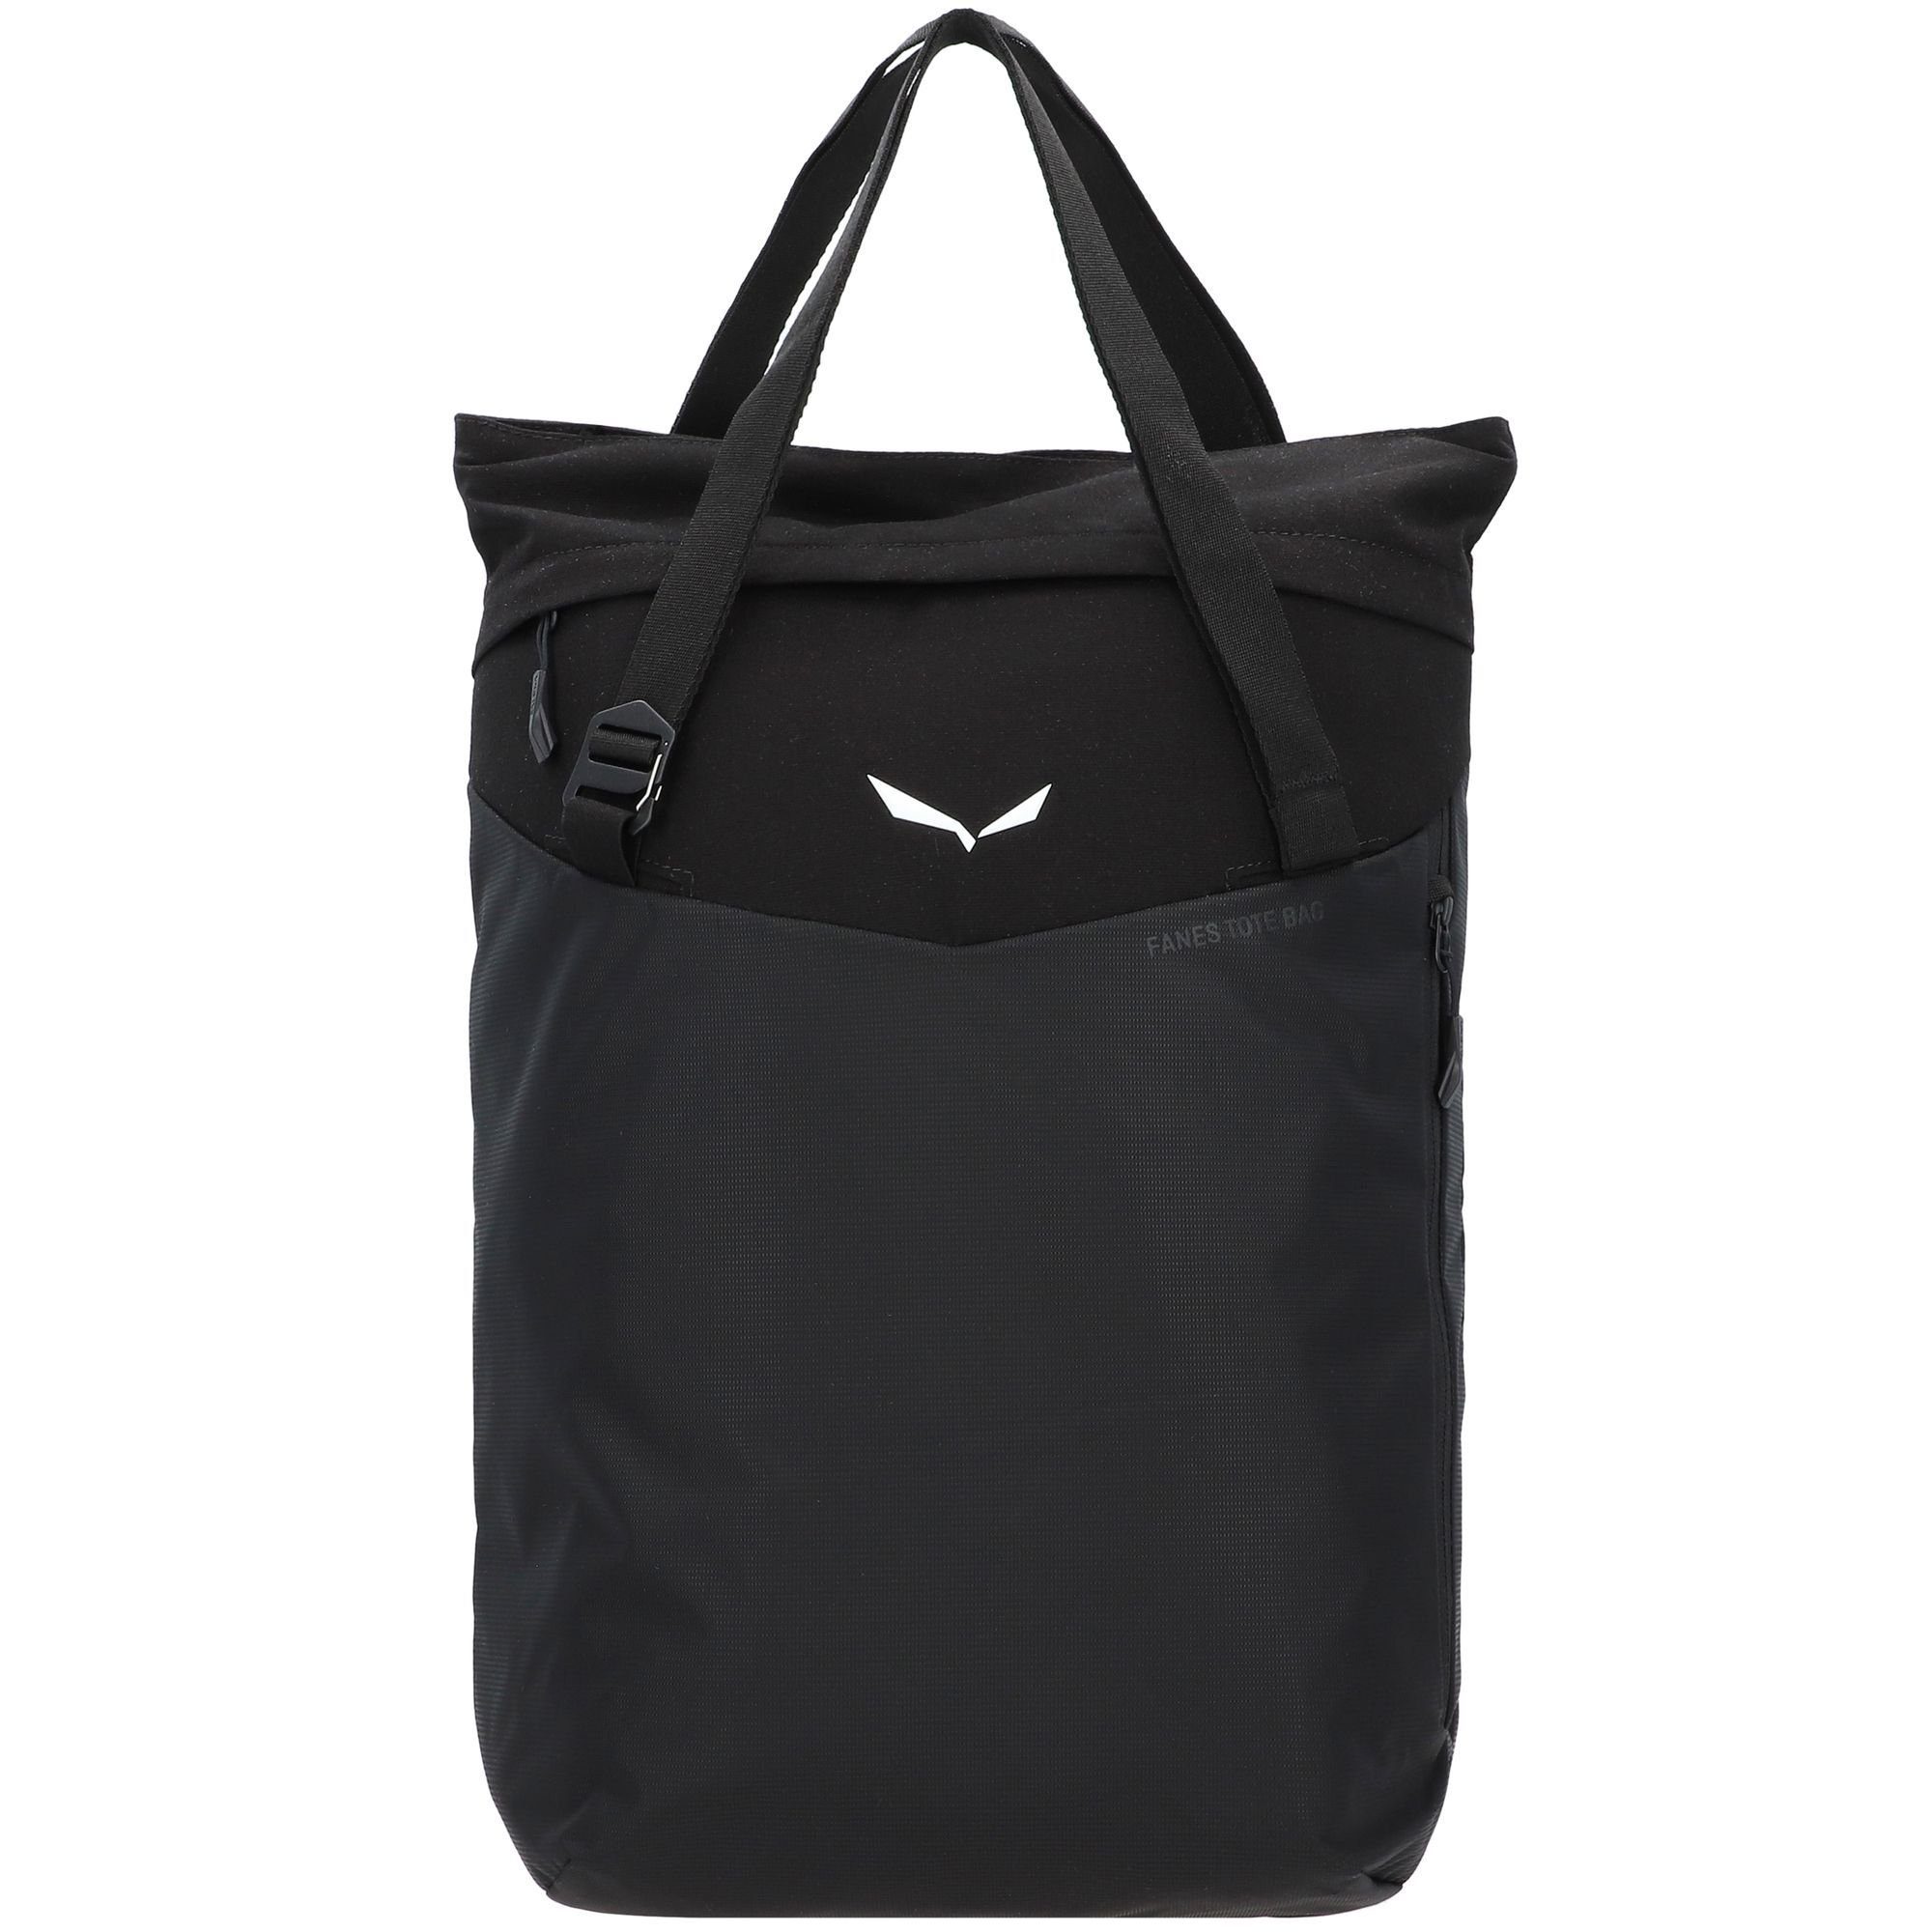 Salewa Schultertasche out Polyester black Fanes,